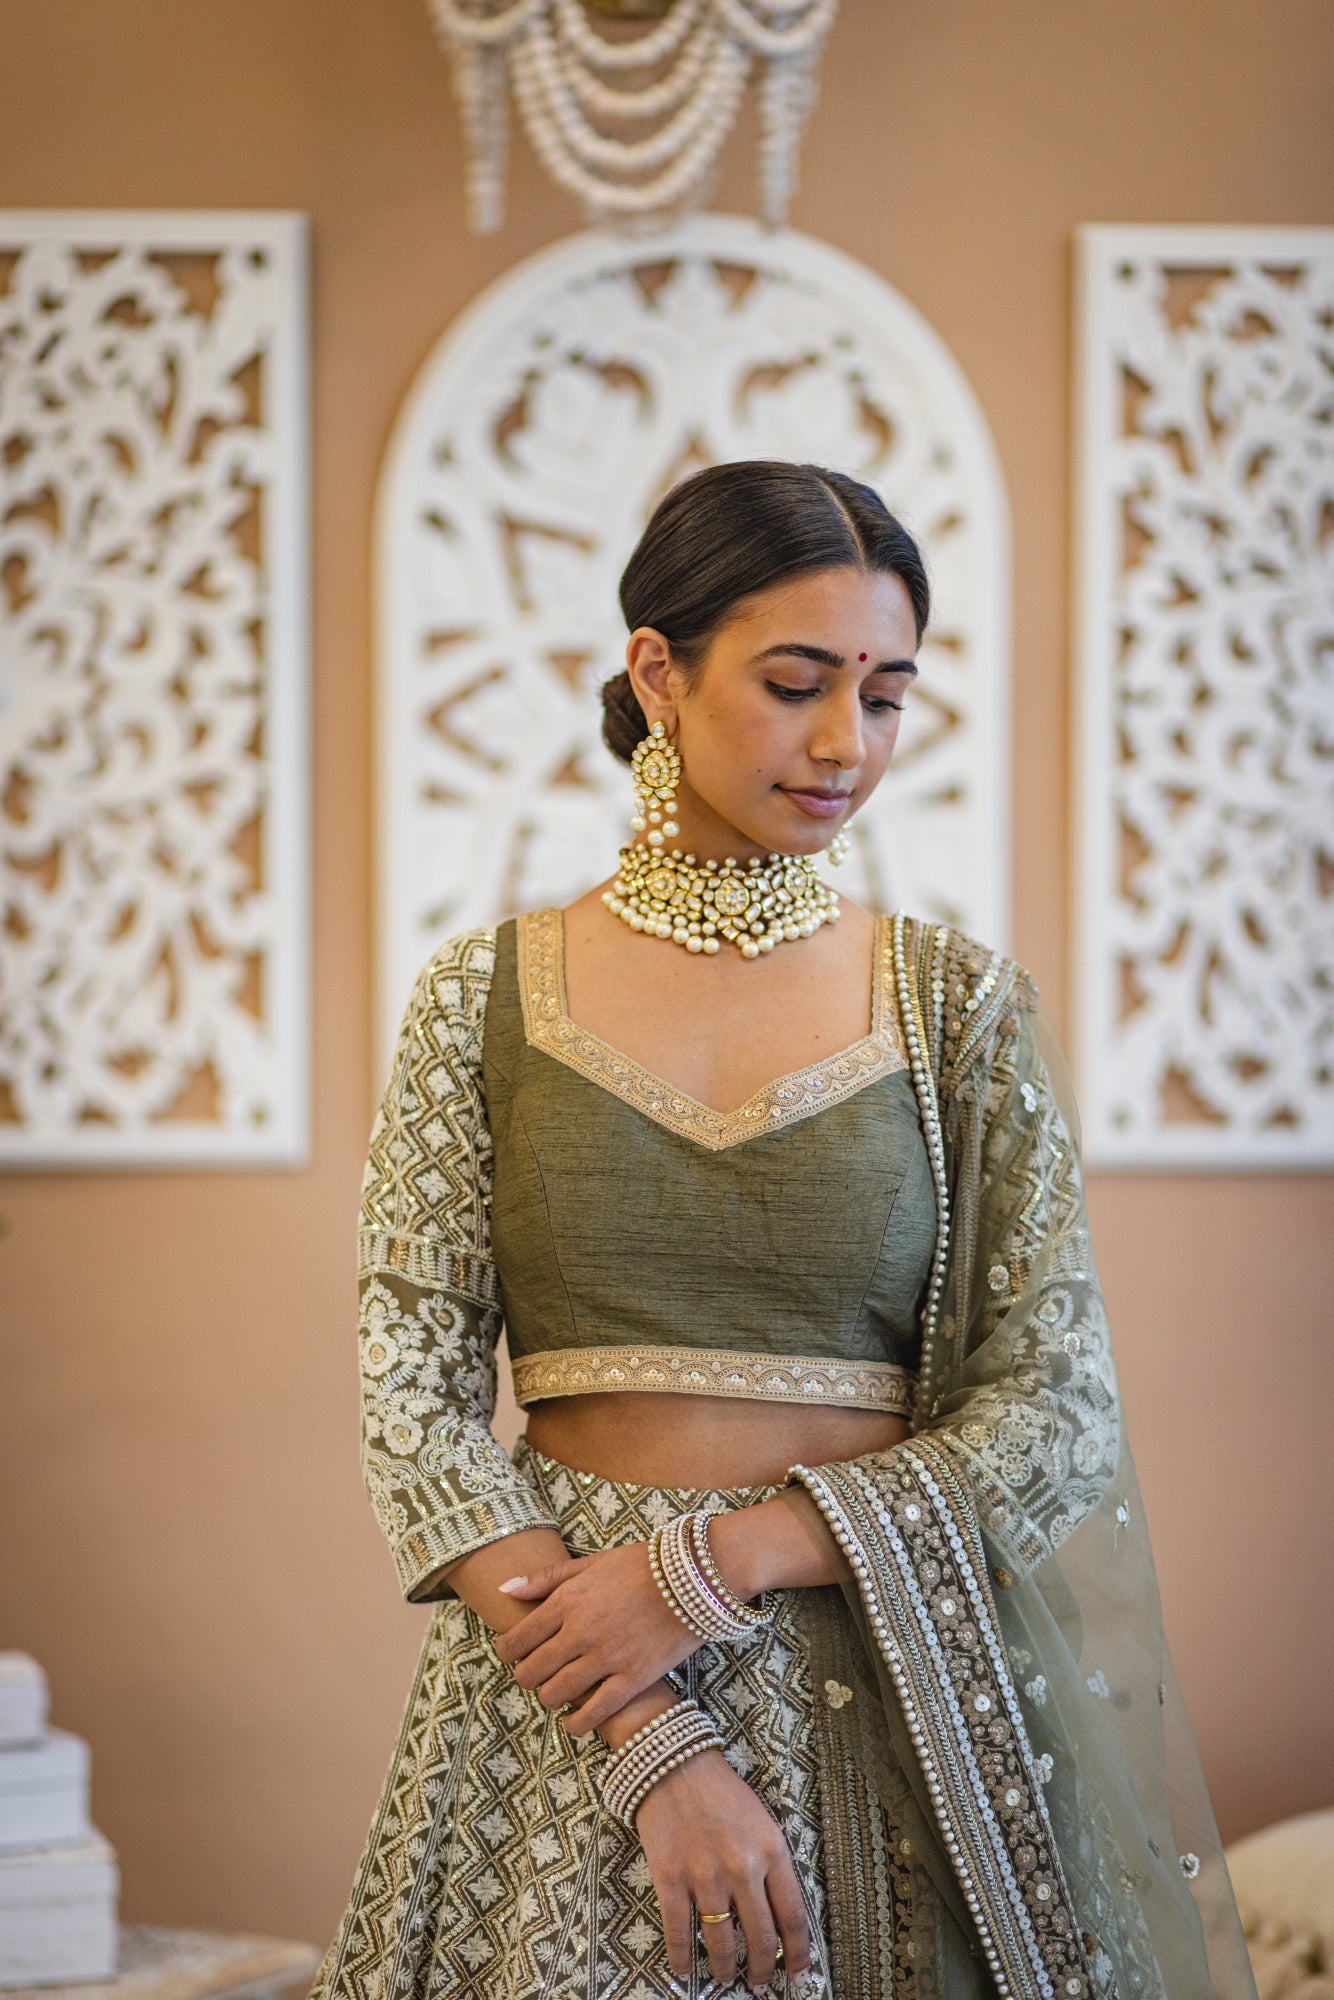 Contrasting Jewellery Ideas To Pair With Your Pink Bridal Lehenga!